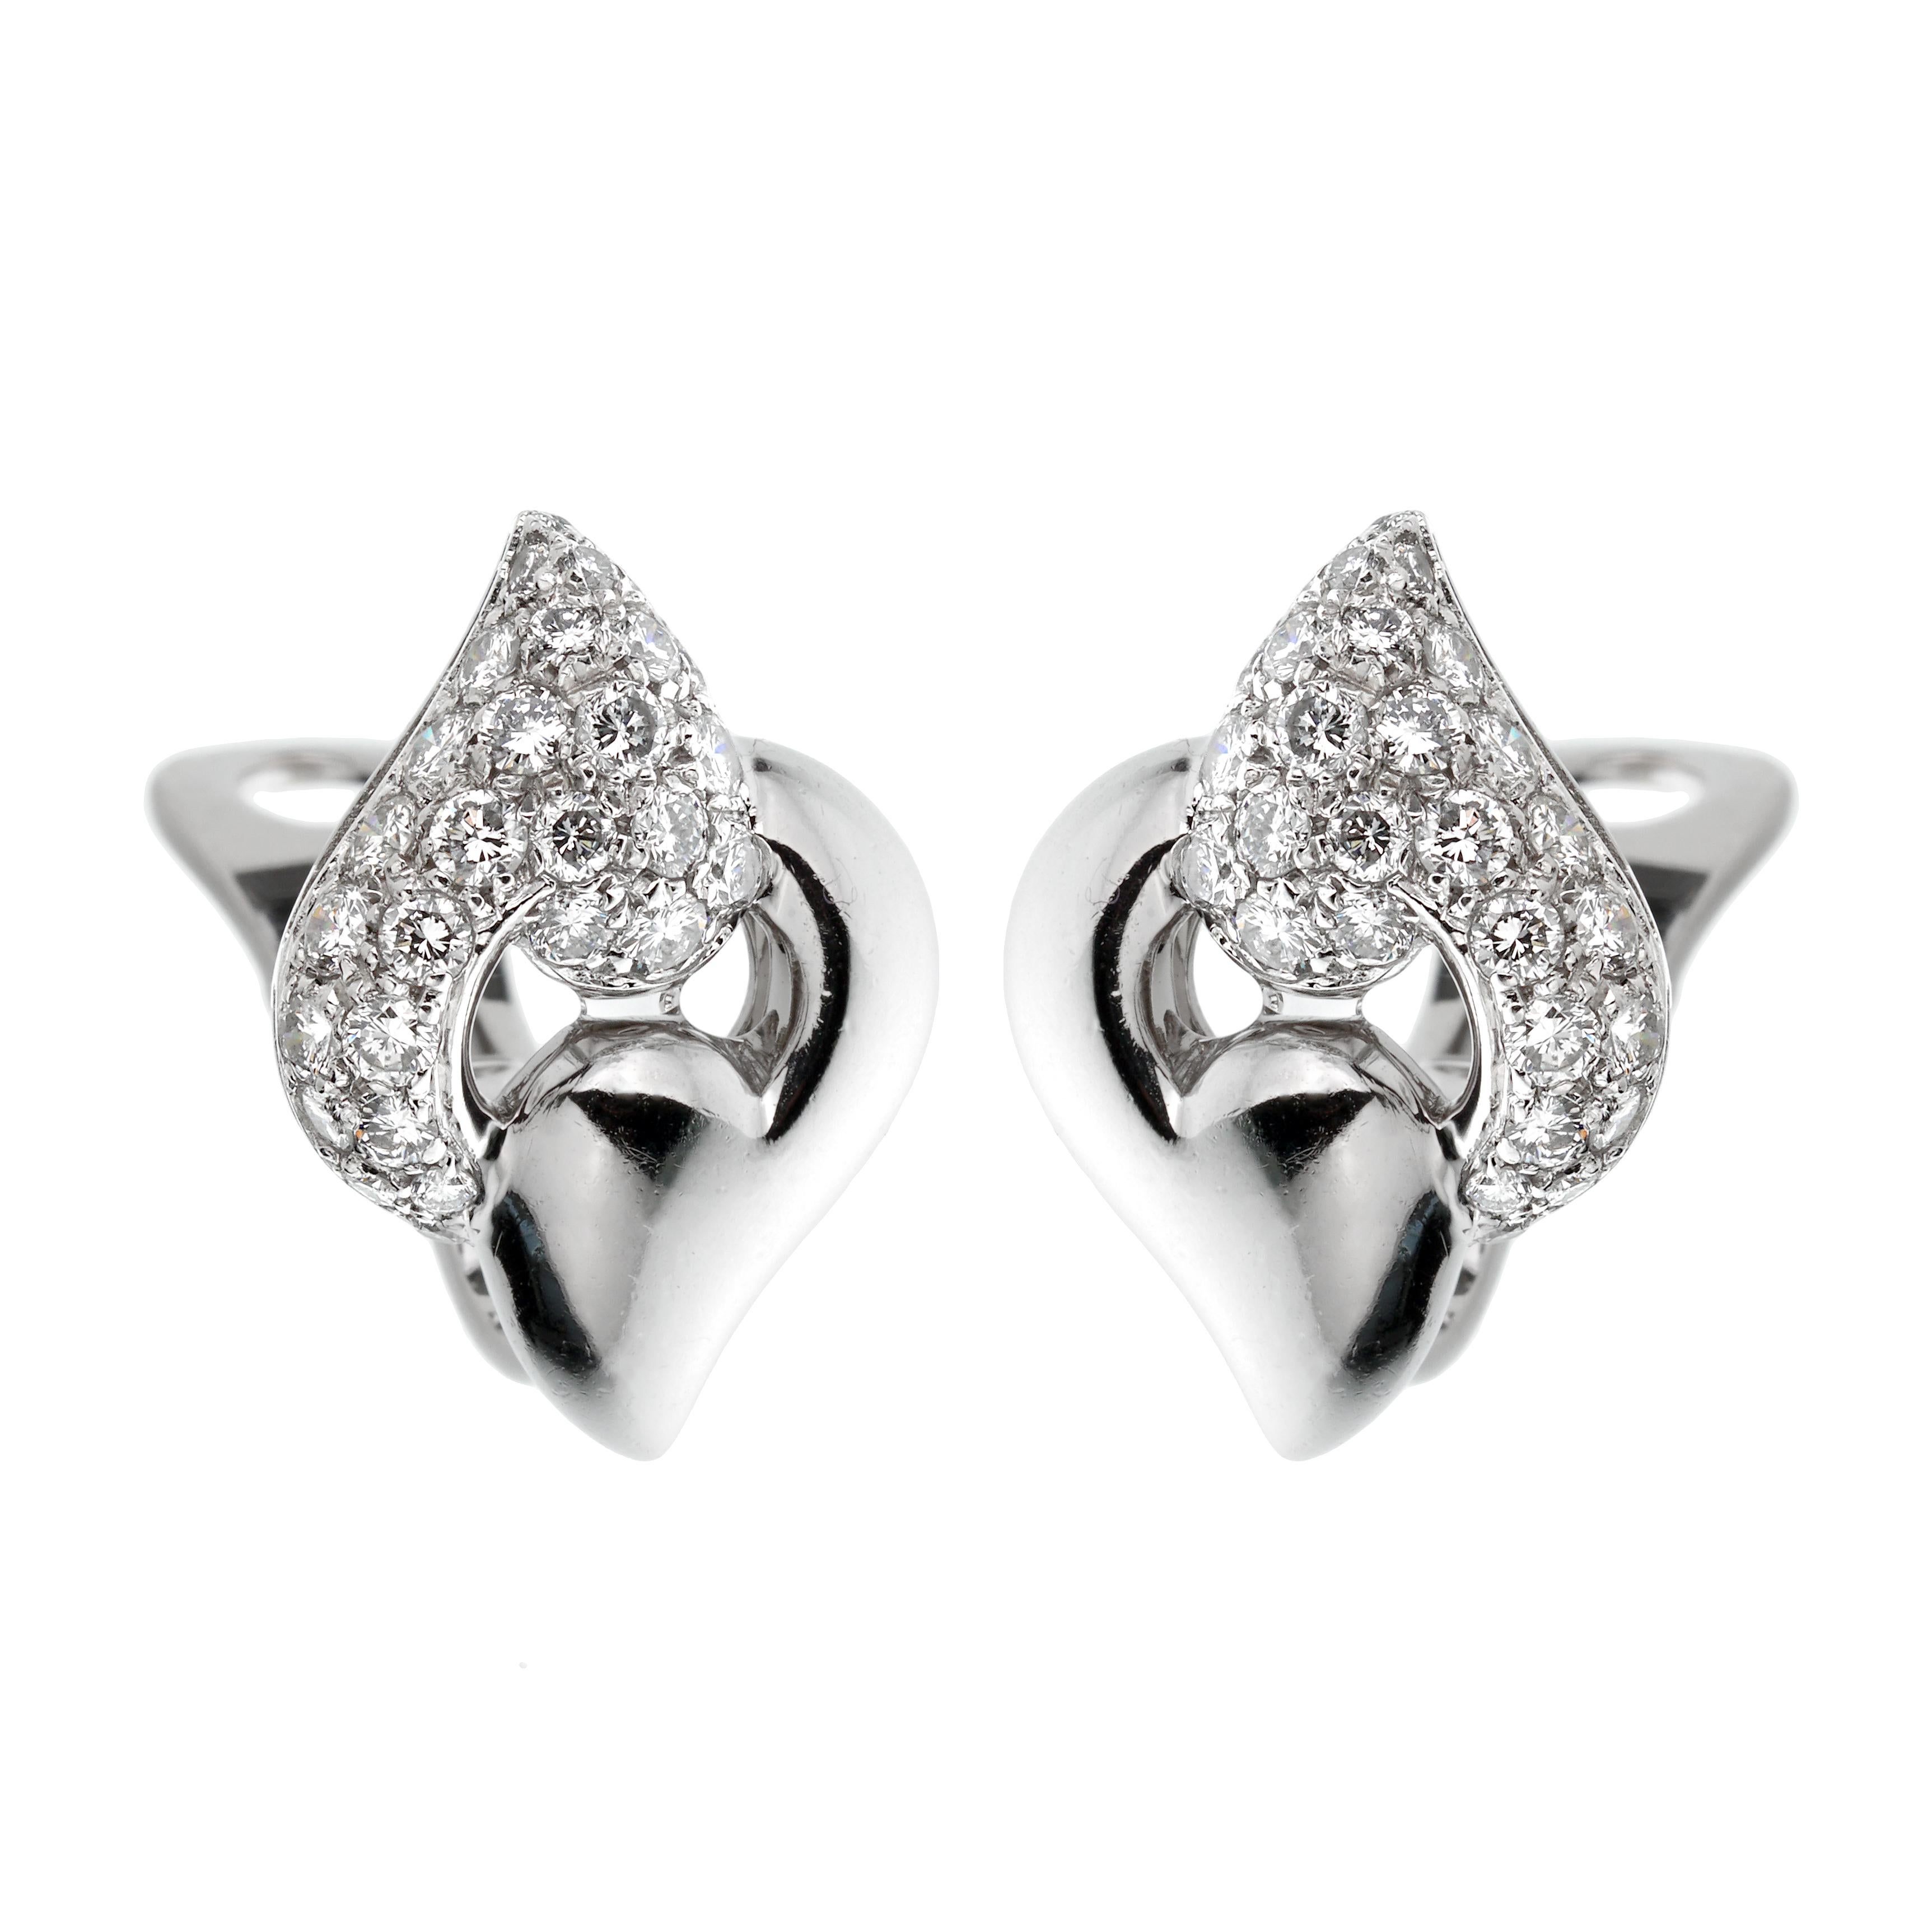 Bvlgari Vintage Diamond White Gold Clip On Earrings In Excellent Condition For Sale In Feasterville, PA